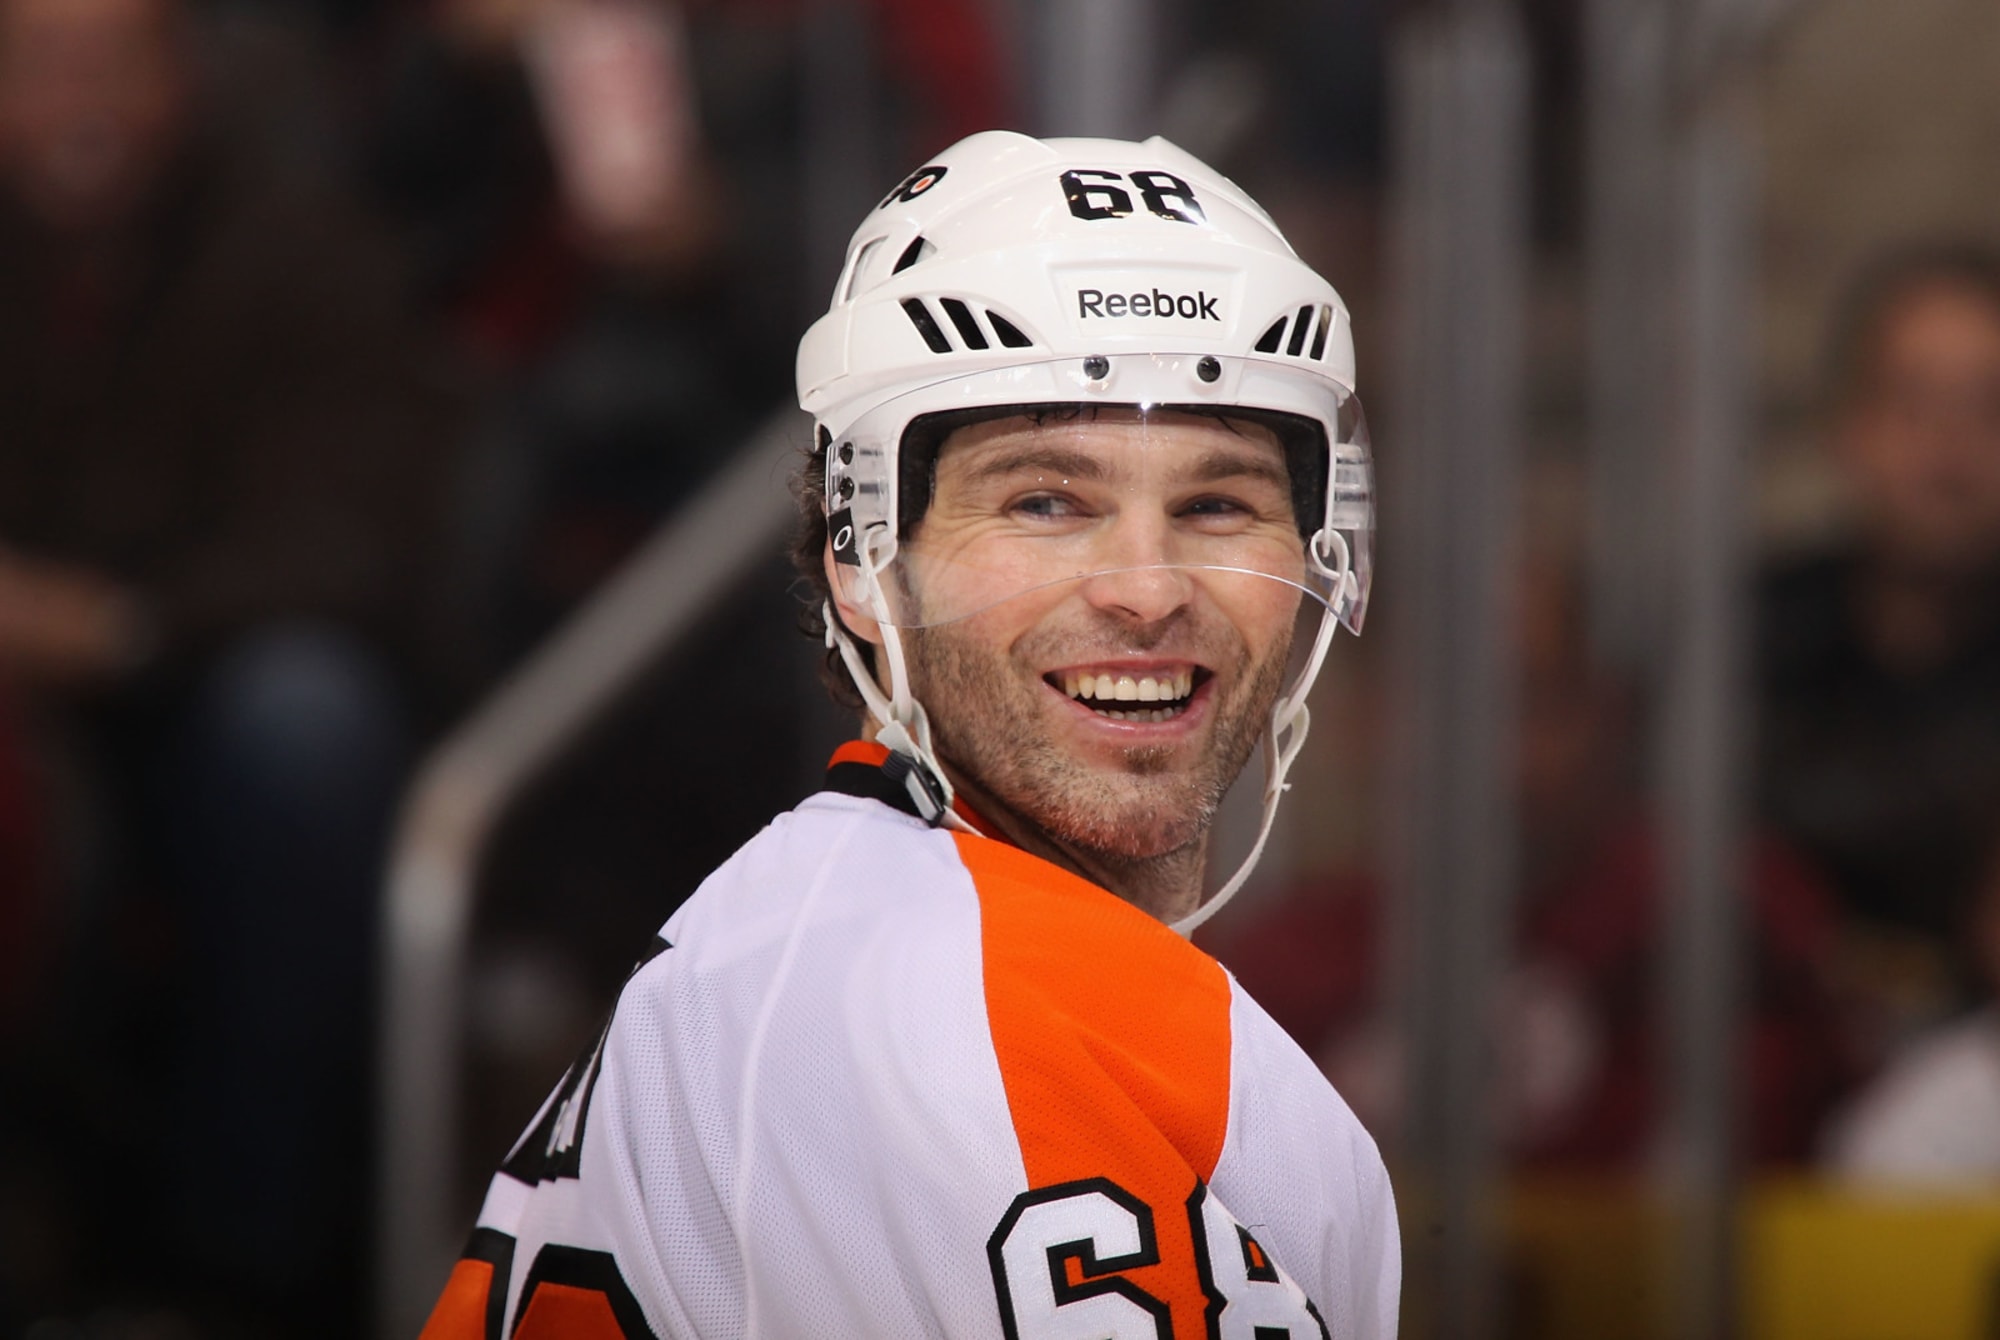 Will Jaromir Jagr Be Back With the Flyers?